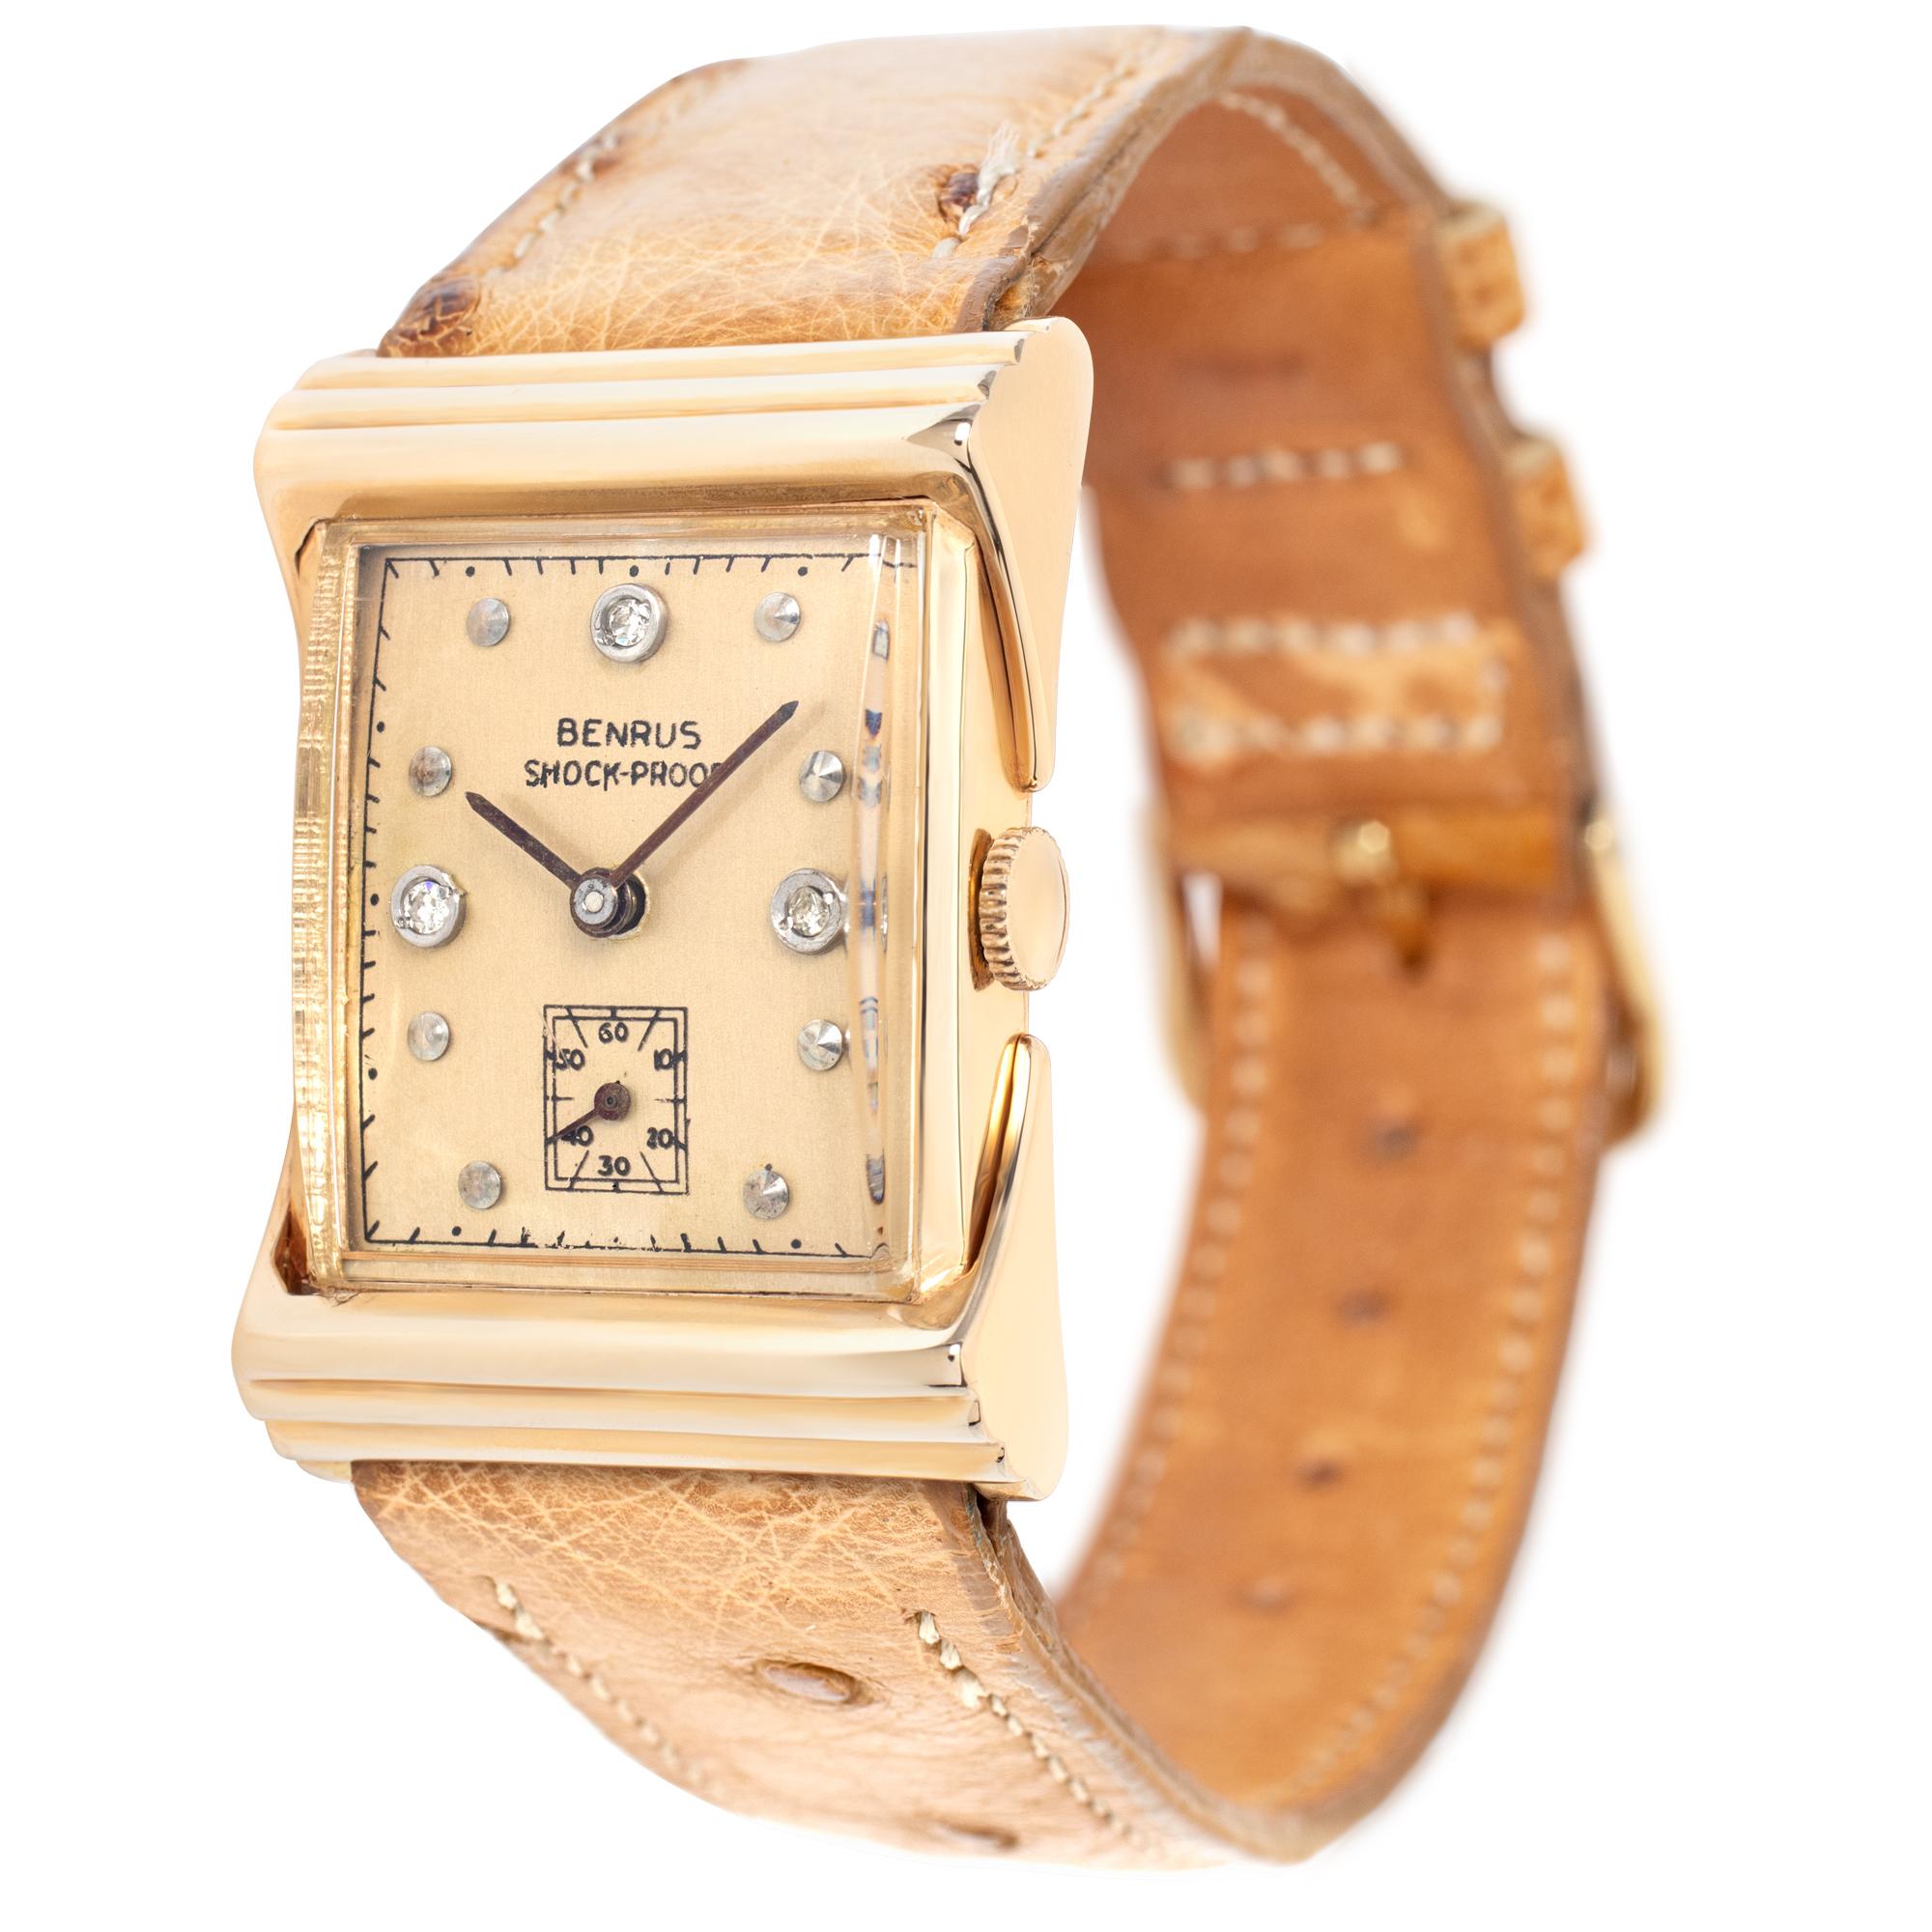 Vintage unisex Benrus Shock-proof  14k yellow gold case, 14k yellow gold  bezel, ostrich leather strap with gold filled tang buckle. Case size 32mm x 22mm. Manual wind. Fine Pre-owned Benrus Watch. Certified preowned Vintage Benrus Classic watch is